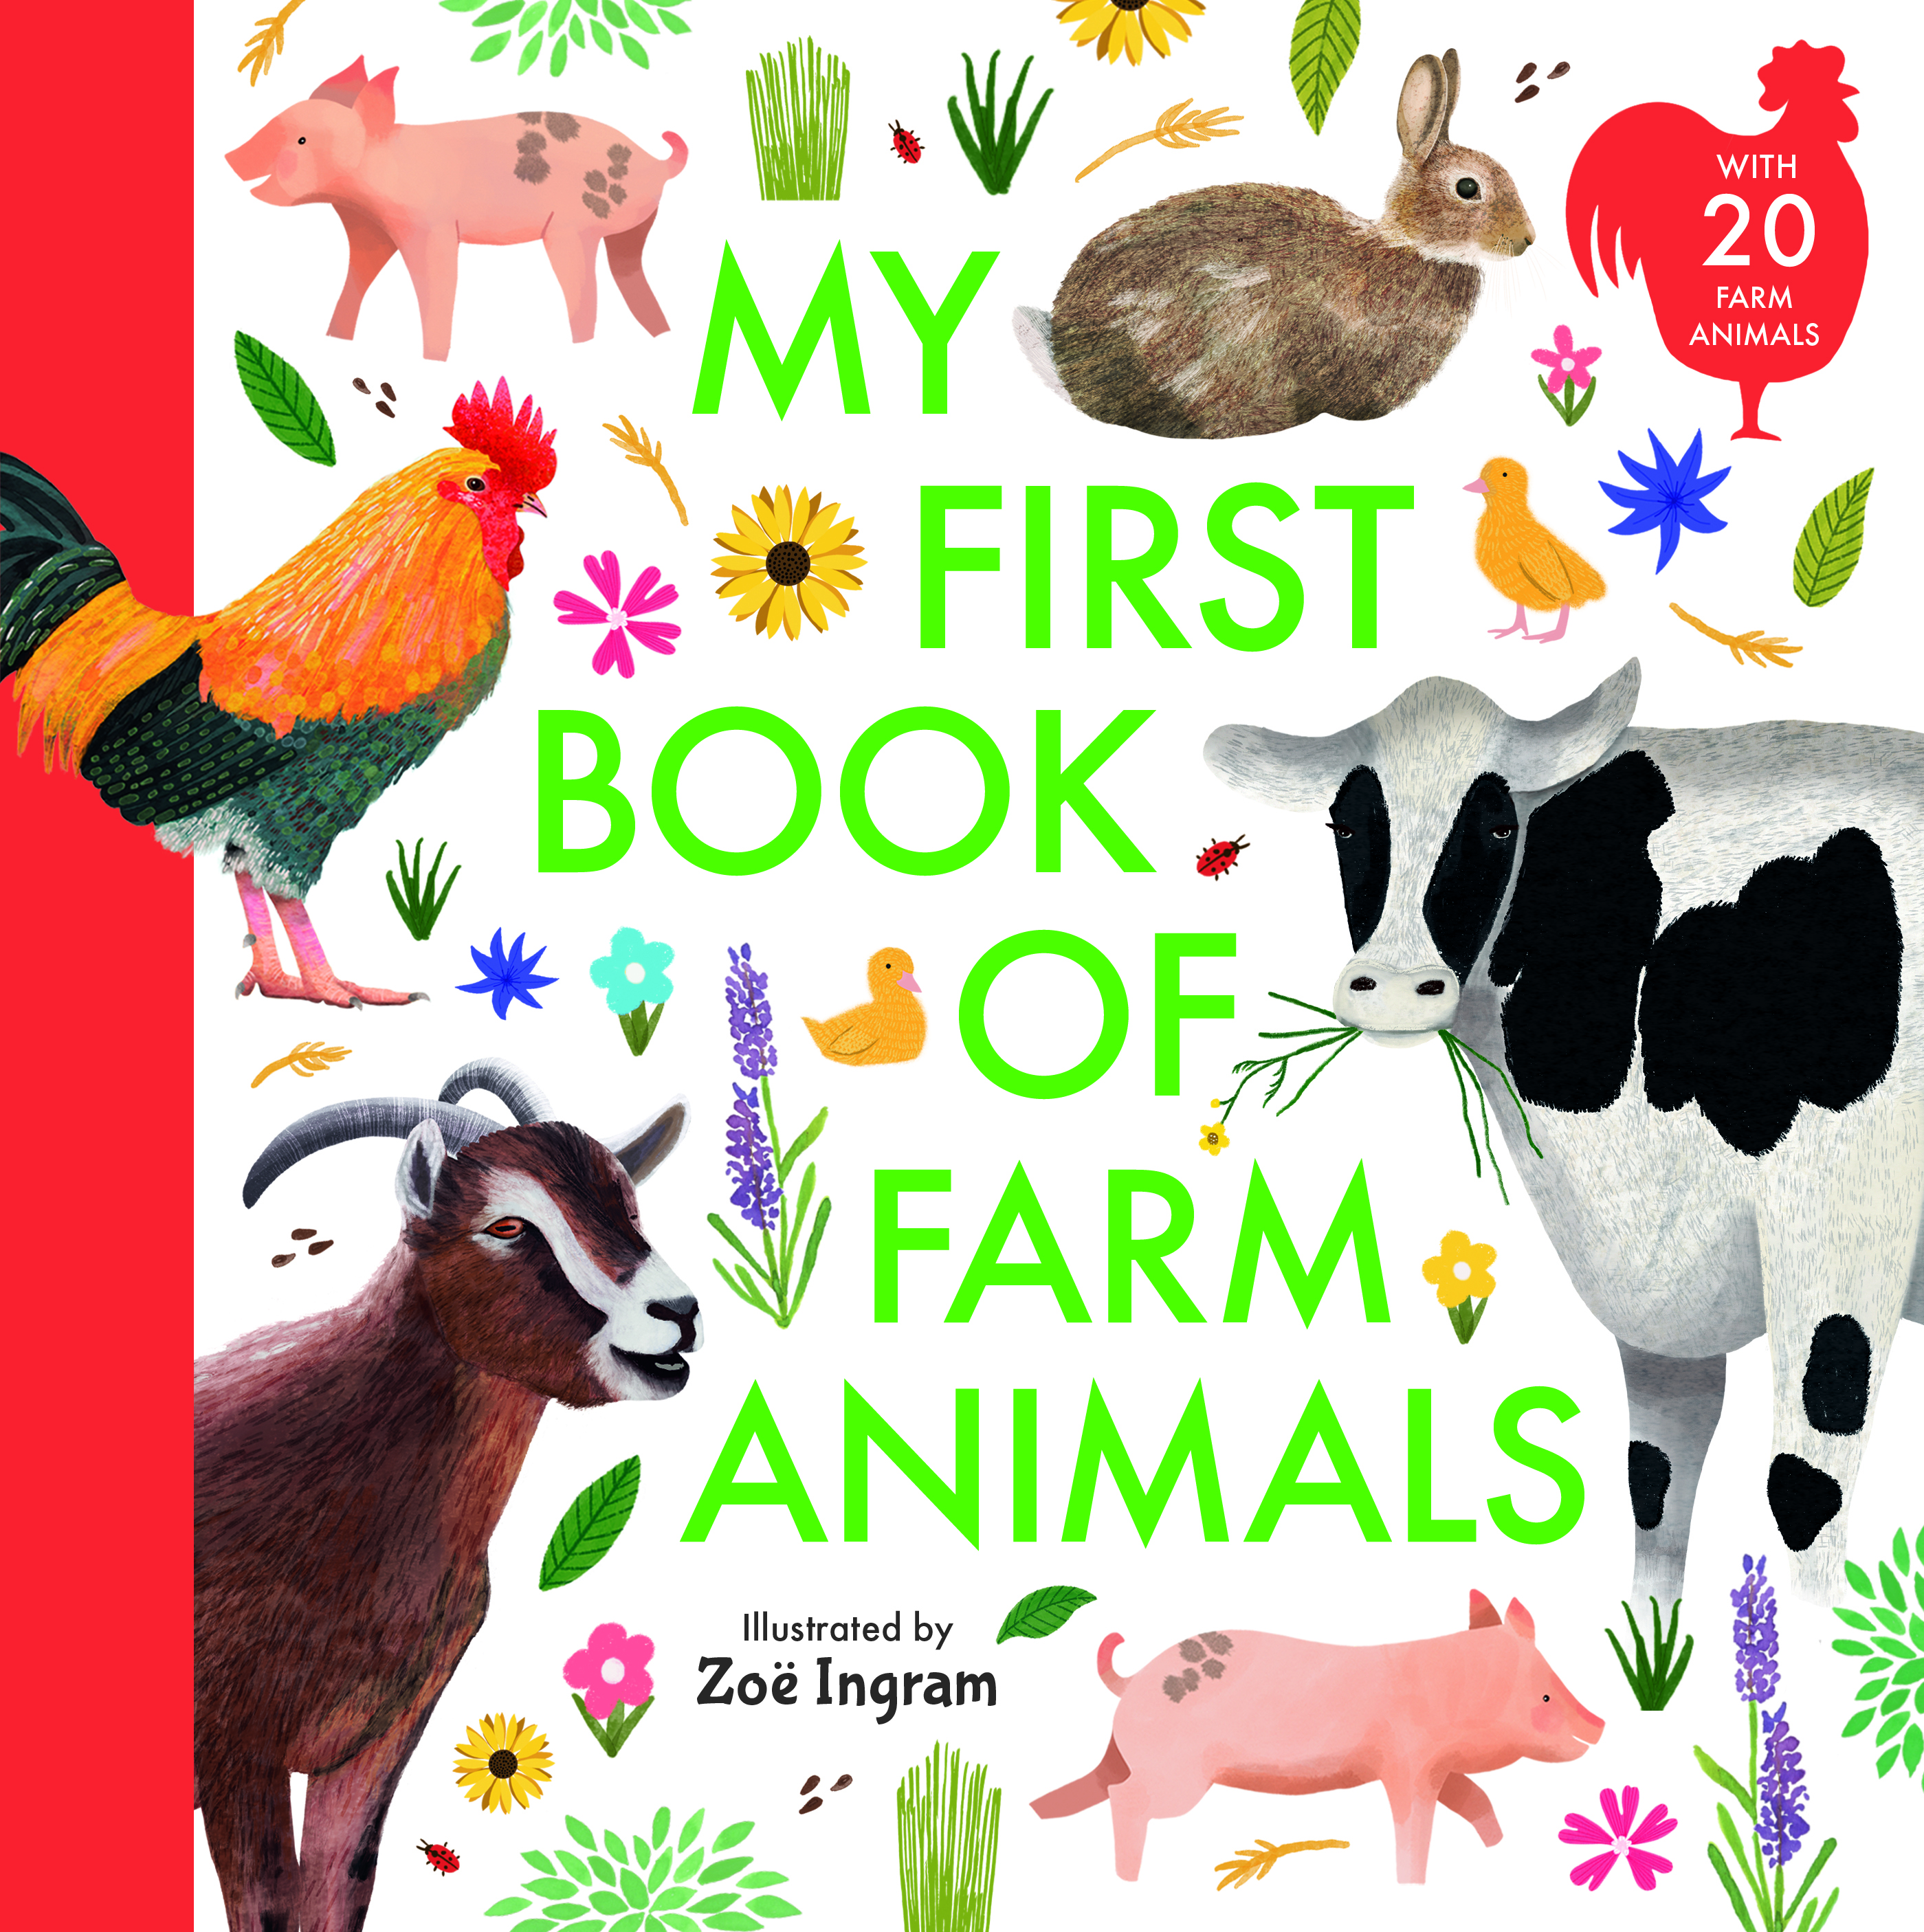 My-First-Book-of-Farm-Animals